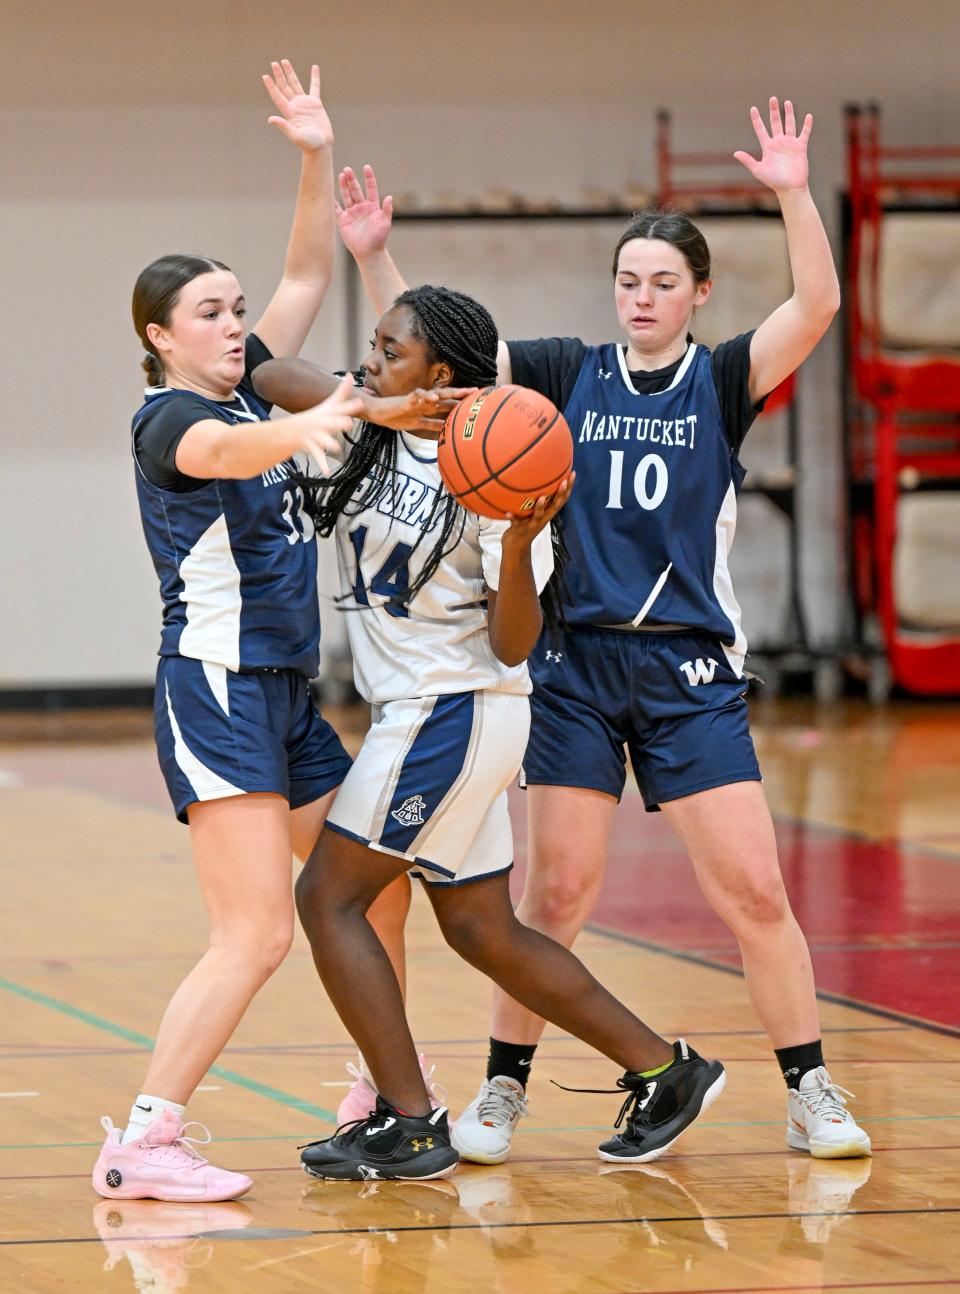 HYANNIS  02/02/24 Maddie Lombardi (left) and Joan Harris of Nantucket pressure Noriann Wray of Sturgis East. Girls basketball
Ron Schloerb/Cape Cod Times